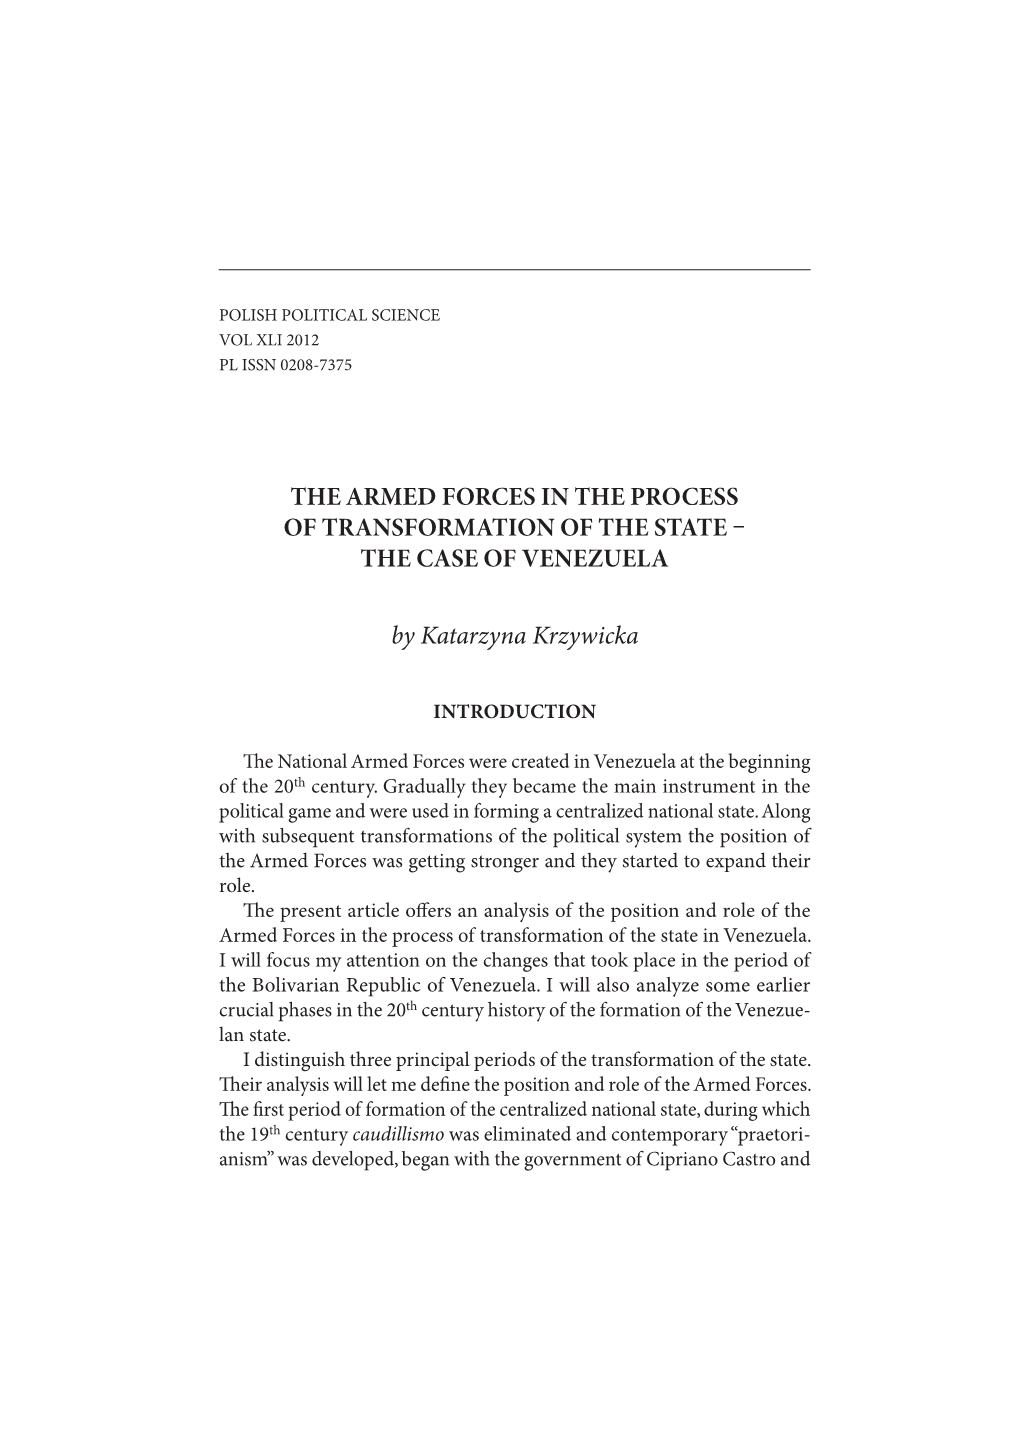 THE ARMED FORCES in the PROCESS of TRANSFORMATION of the STATE the CASE of VENEZUELA by Katarzyna Krzywicka